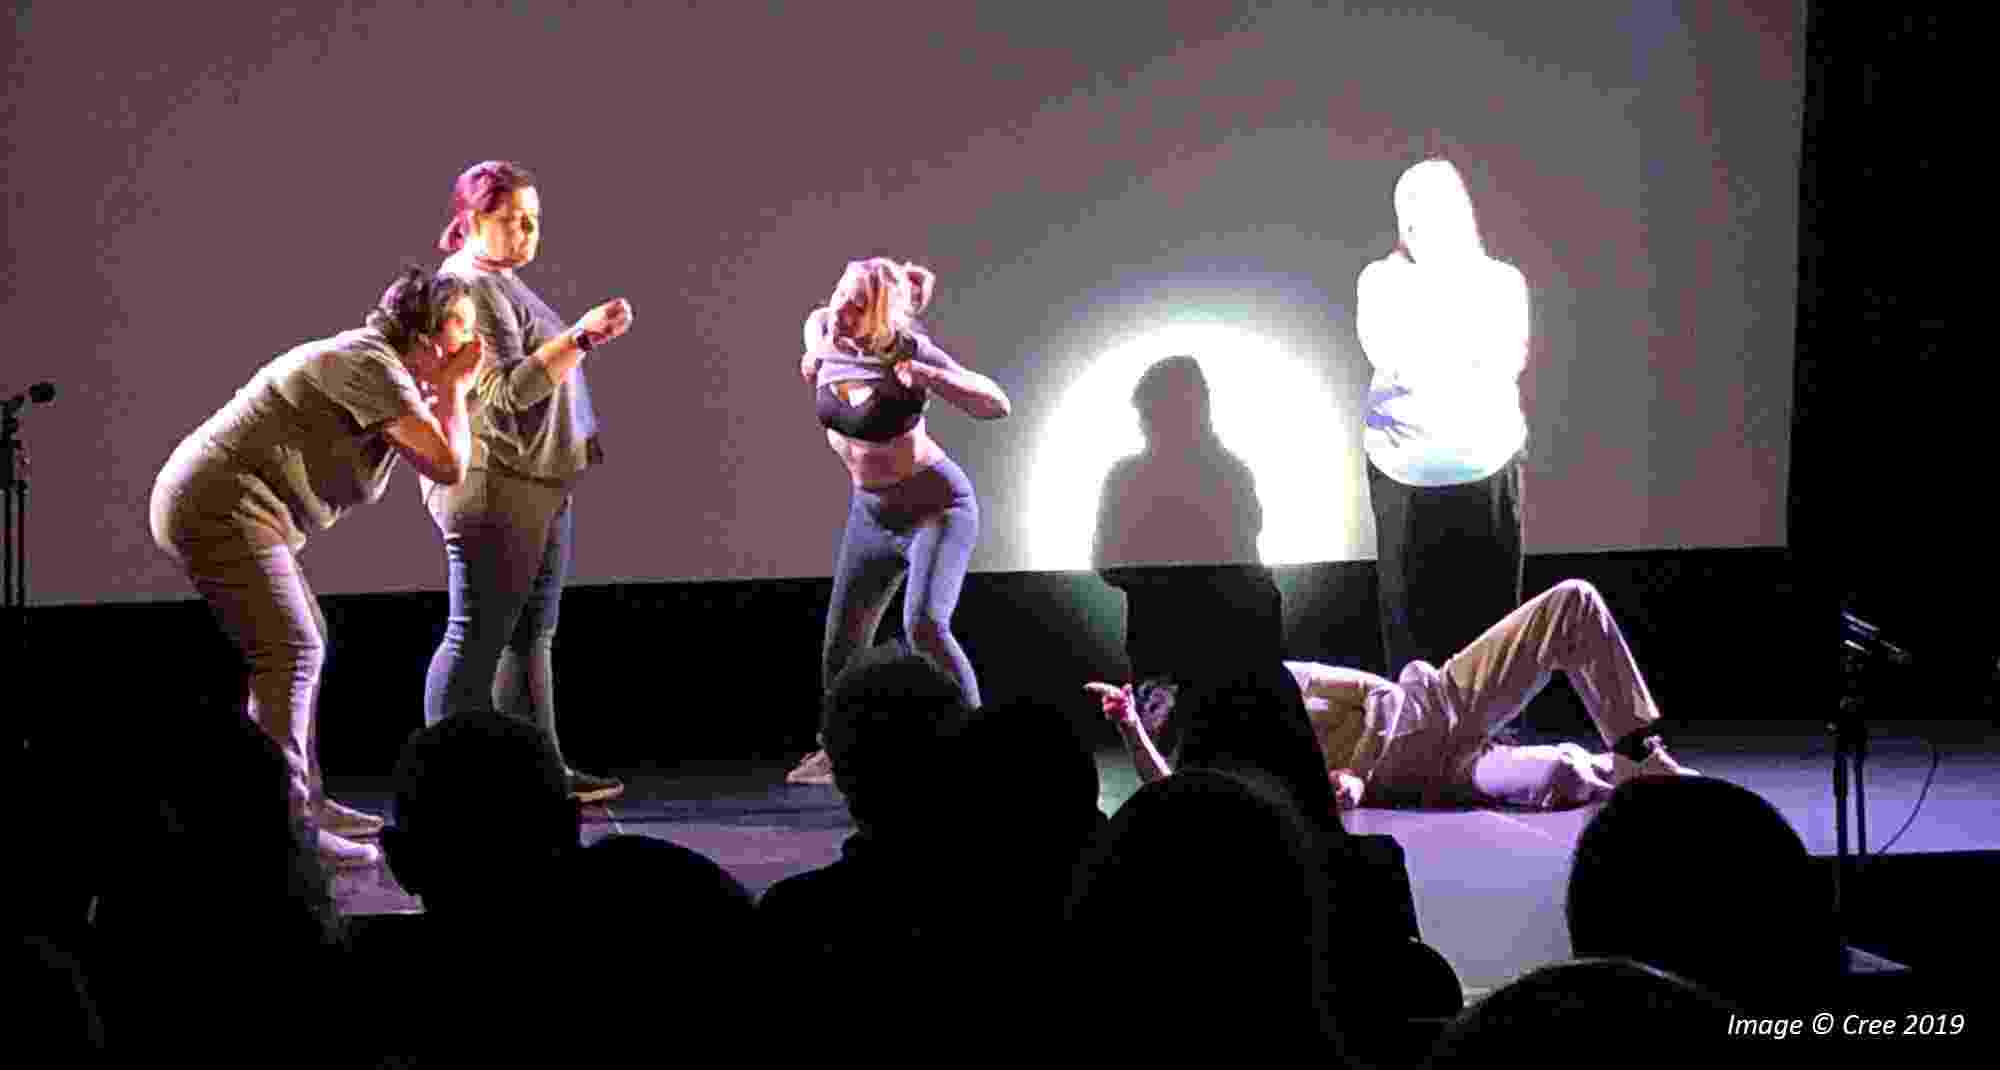 View from within the audience of five people on stage performing under a spotlight